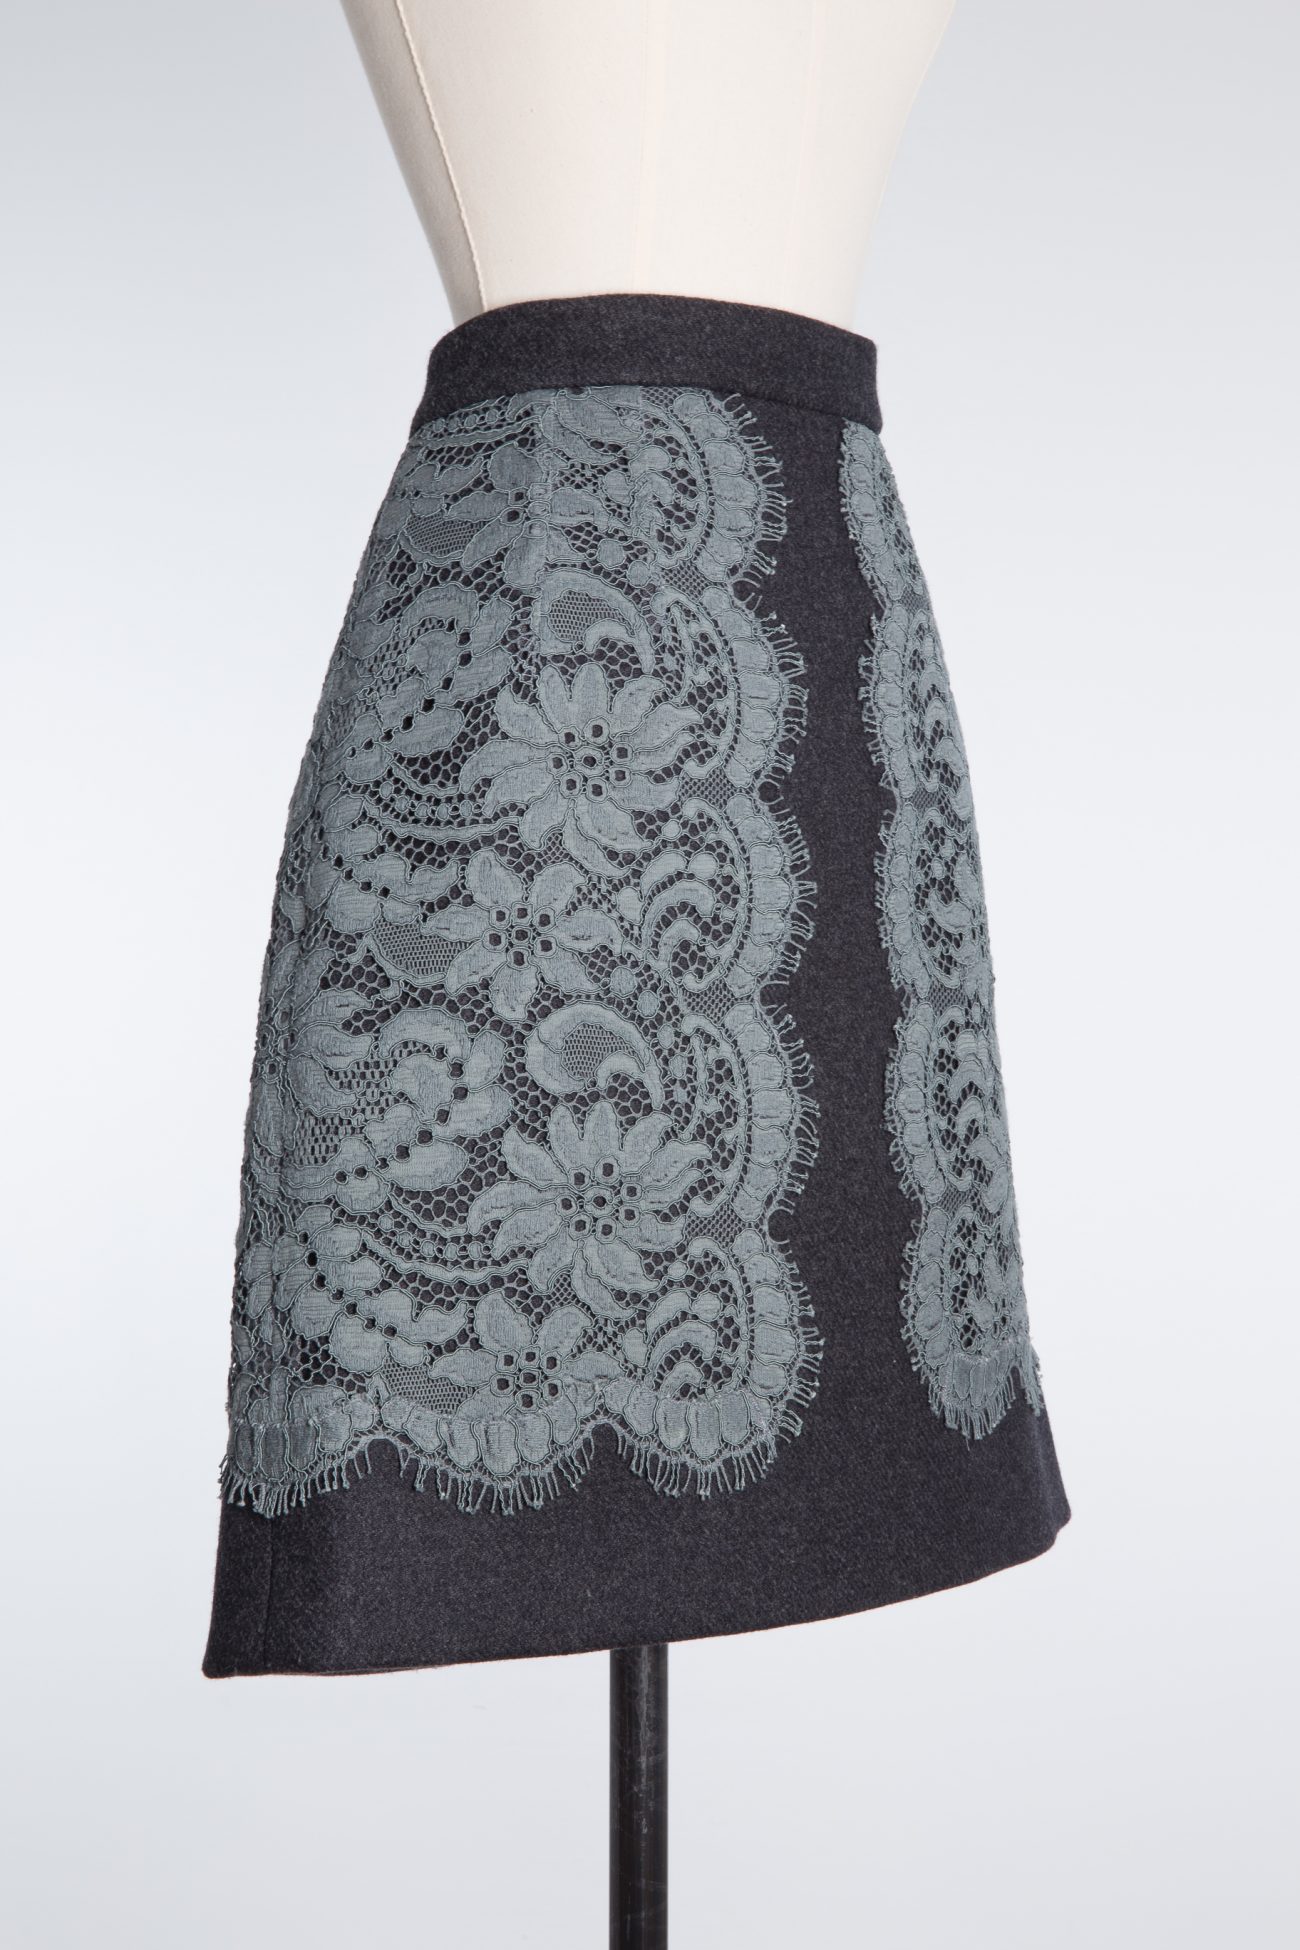 Dolce&Gabbana lace trimmed wool skirt